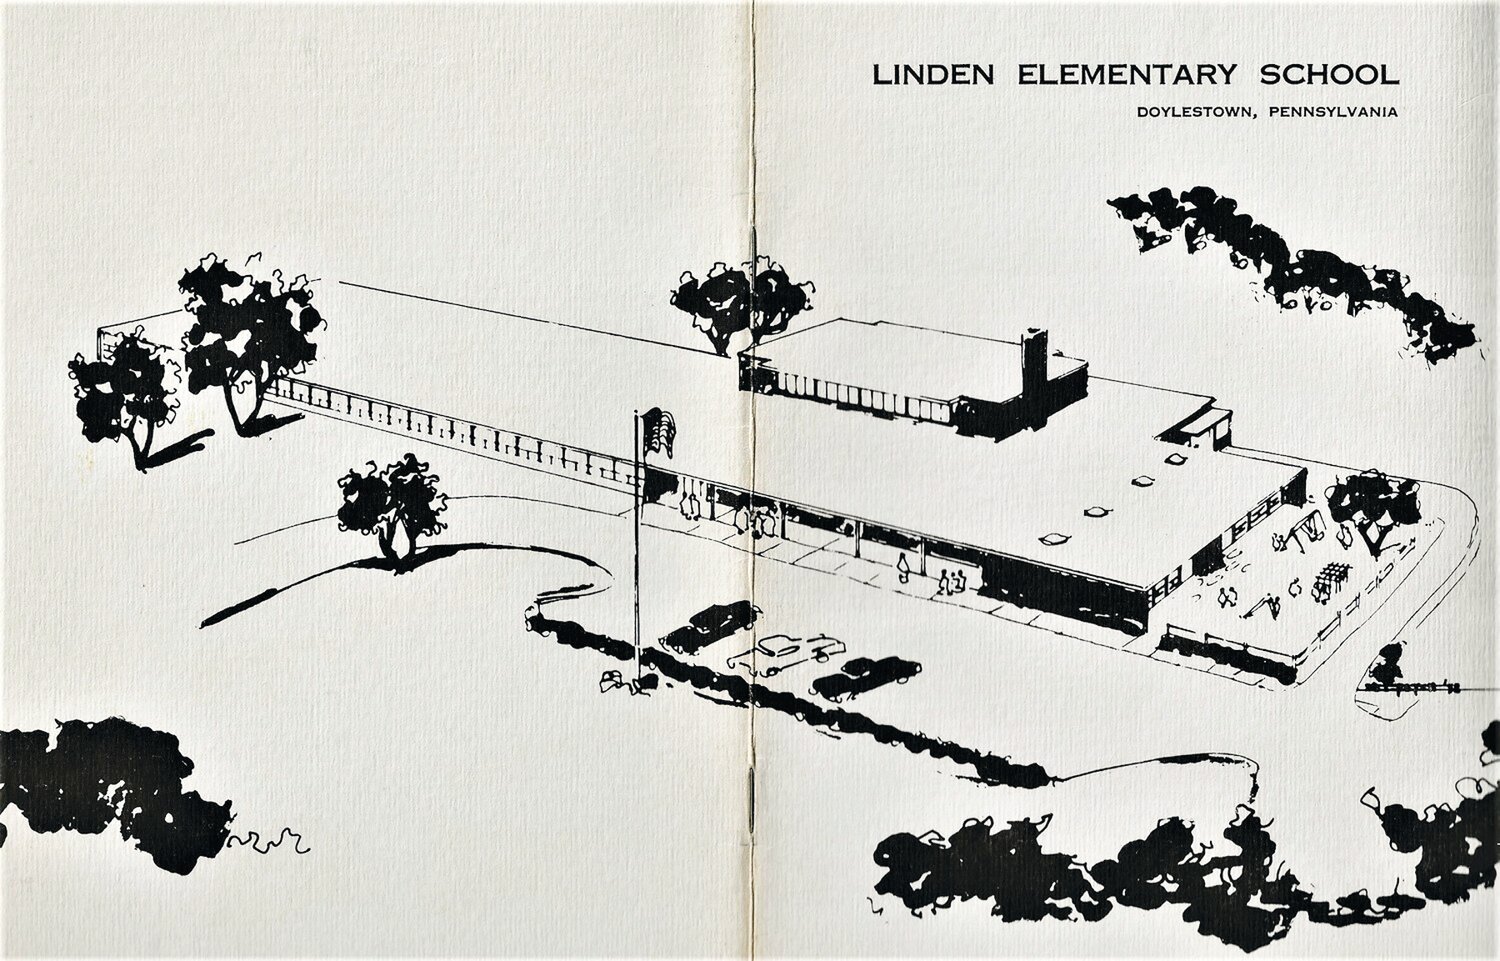 Linden Elementary School in the Central Bucks School District has been a part of the community since 1959.